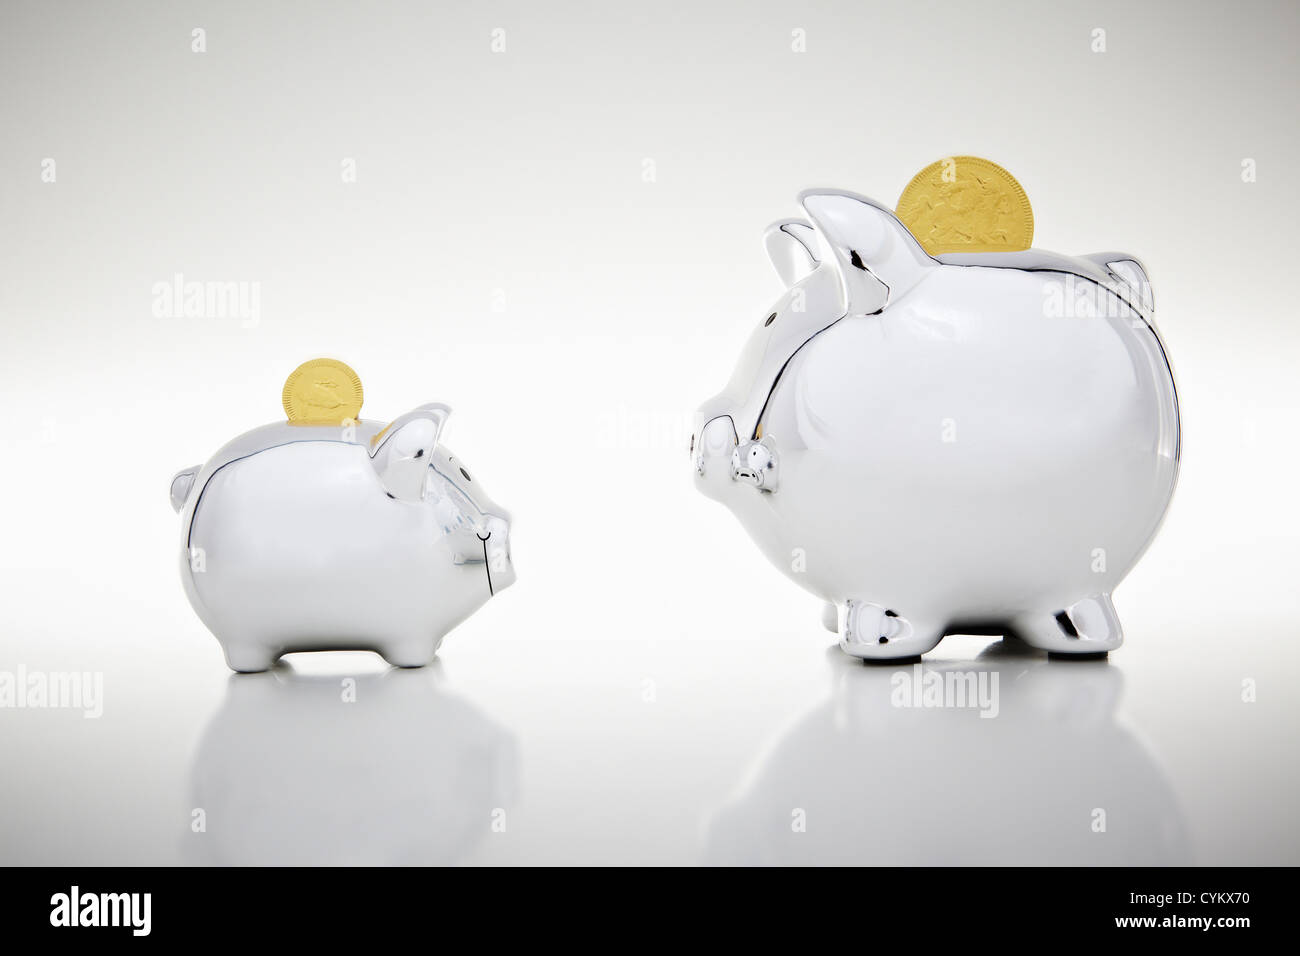 Gold coins dropping into piggy banks Stock Photo